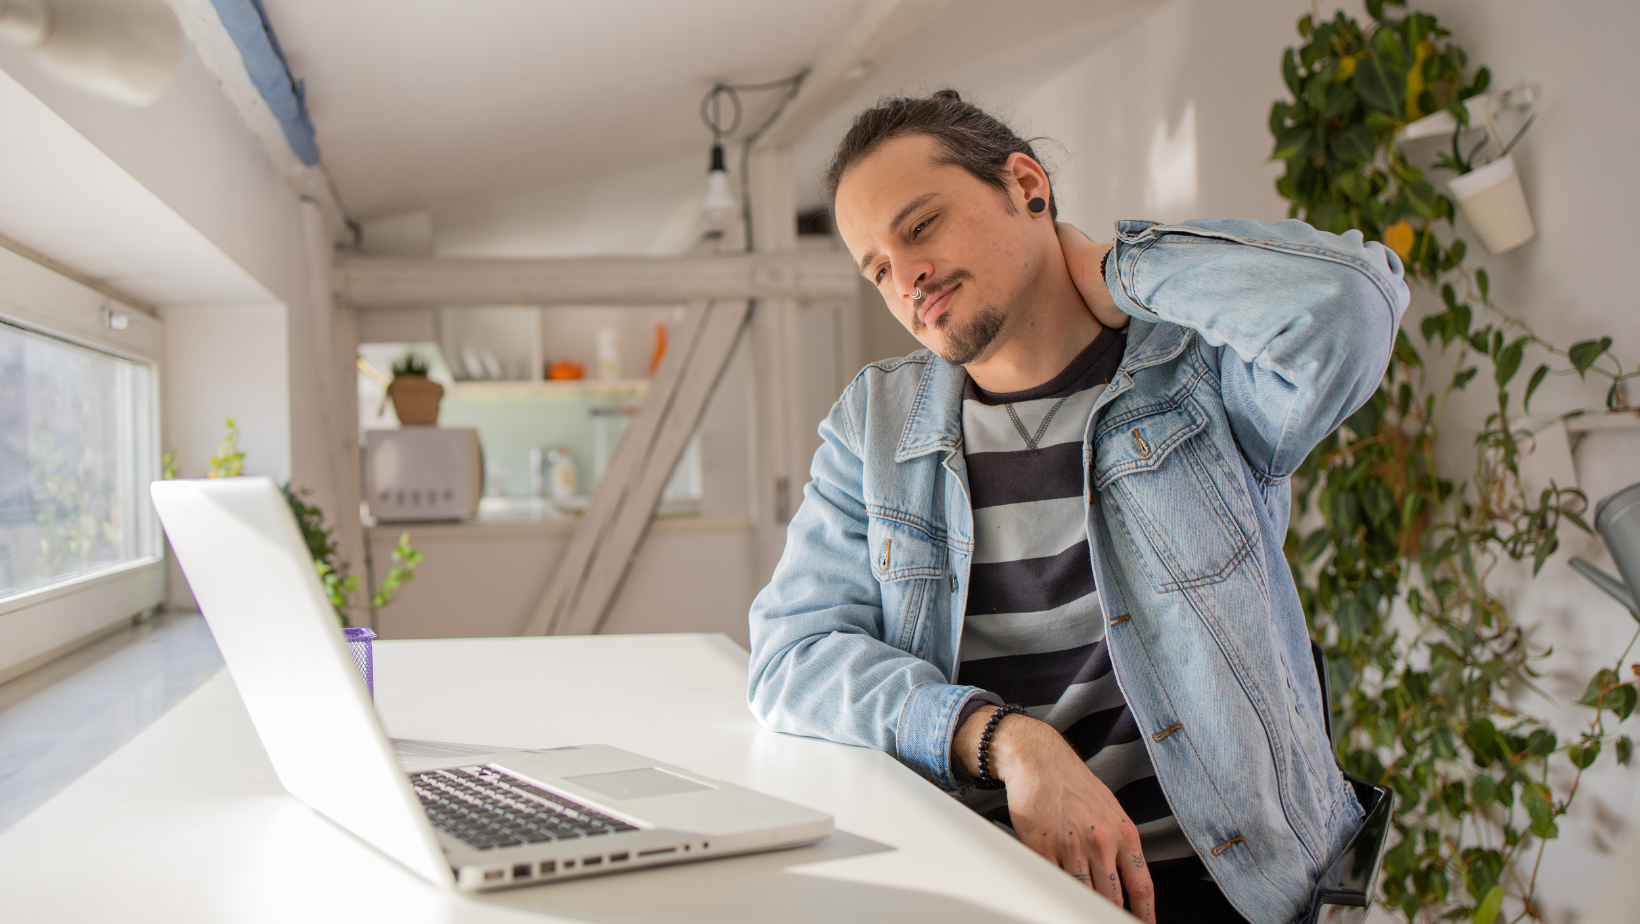 Man working from home rubbing his stiff neck